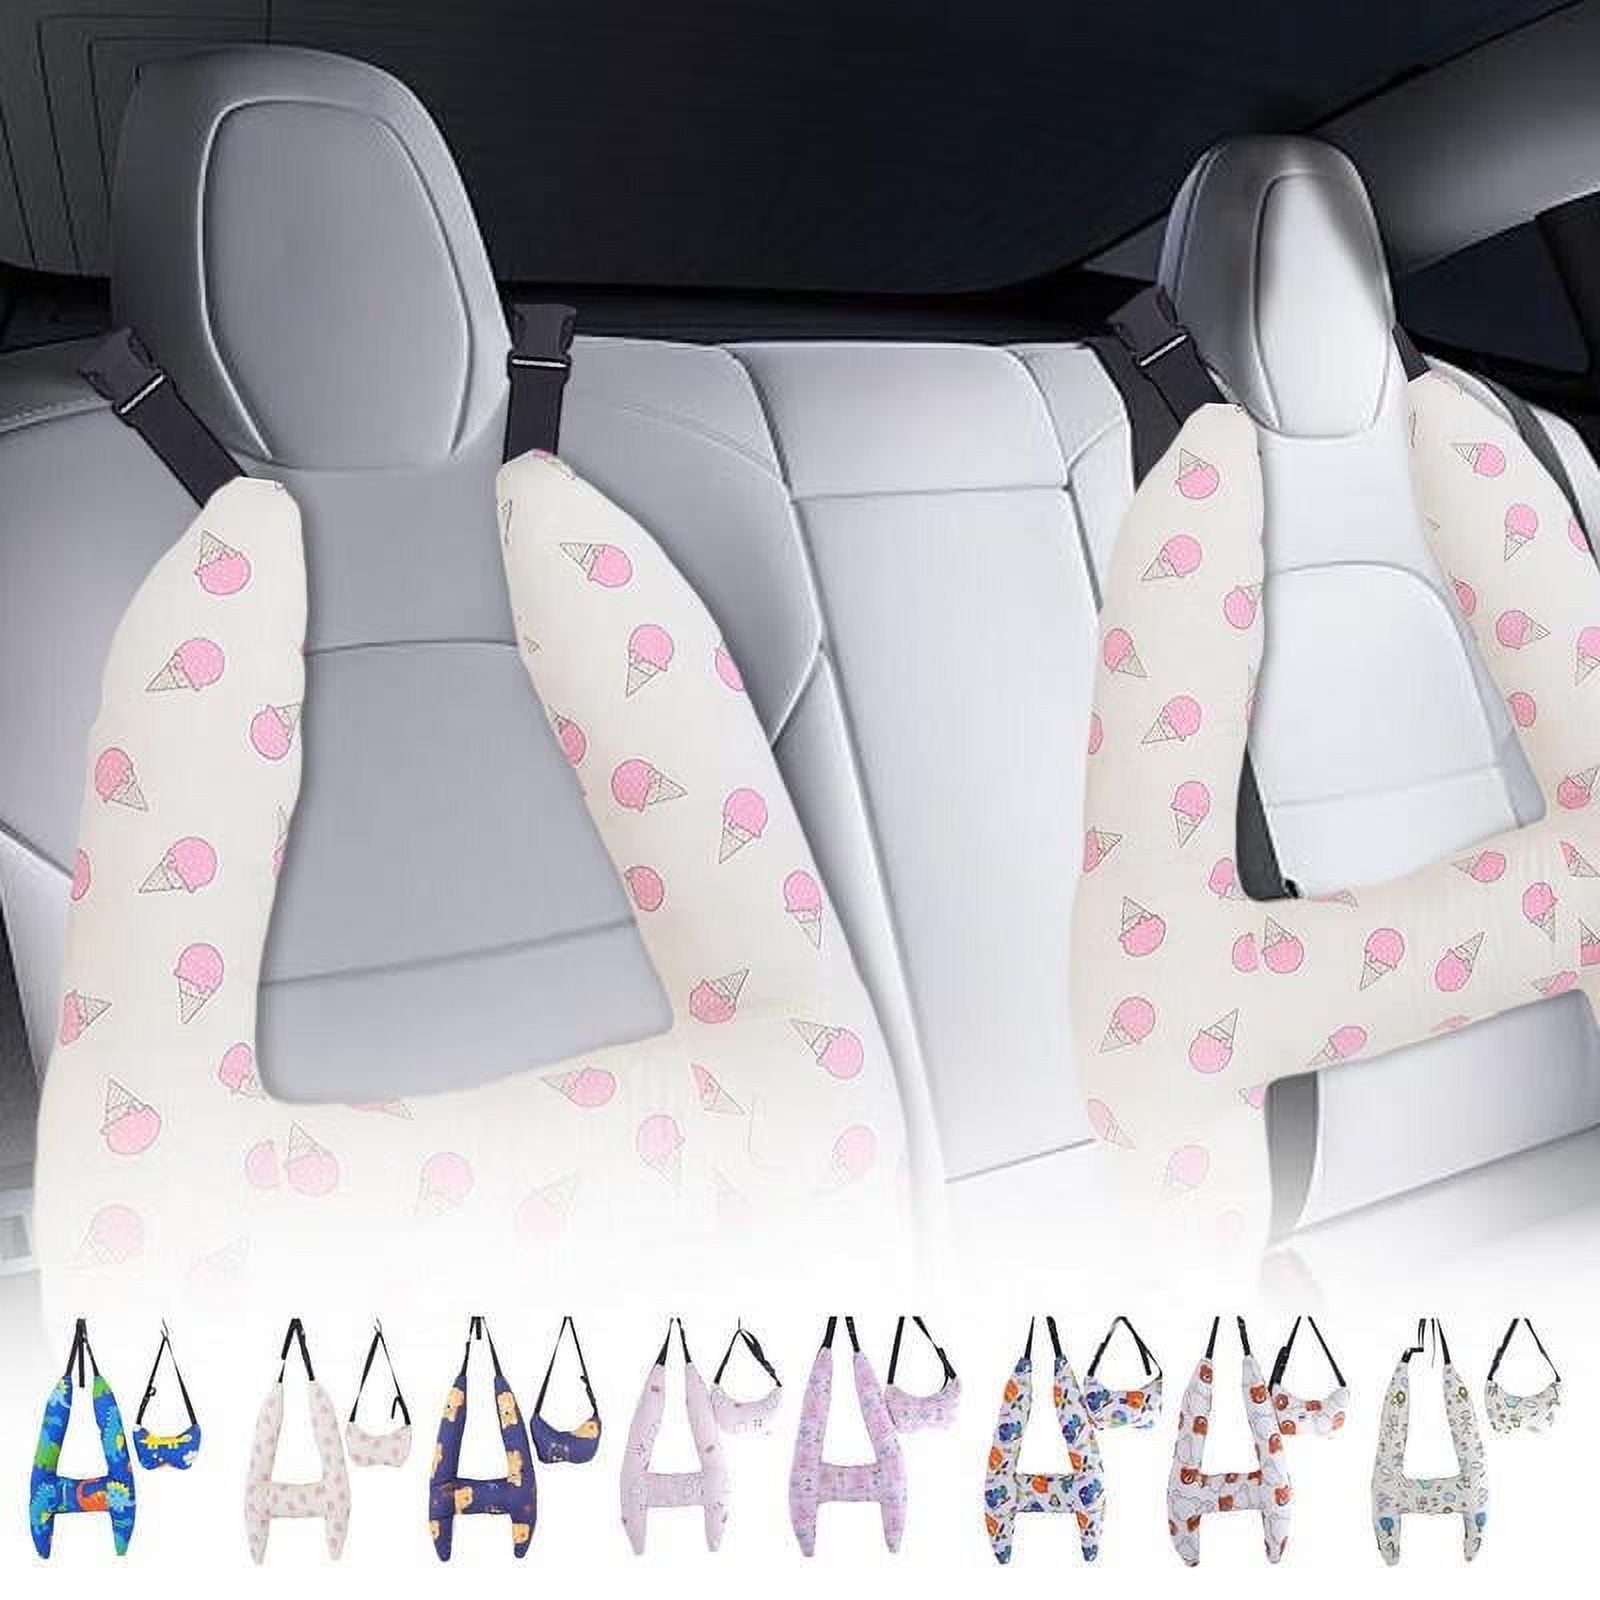 2 Pcs Travel Pillow Car Sleeping Kid Neck U Shaped for The Back Seat Adults  Children Head and Body Support Long Distance Journey Accessories (Gray)